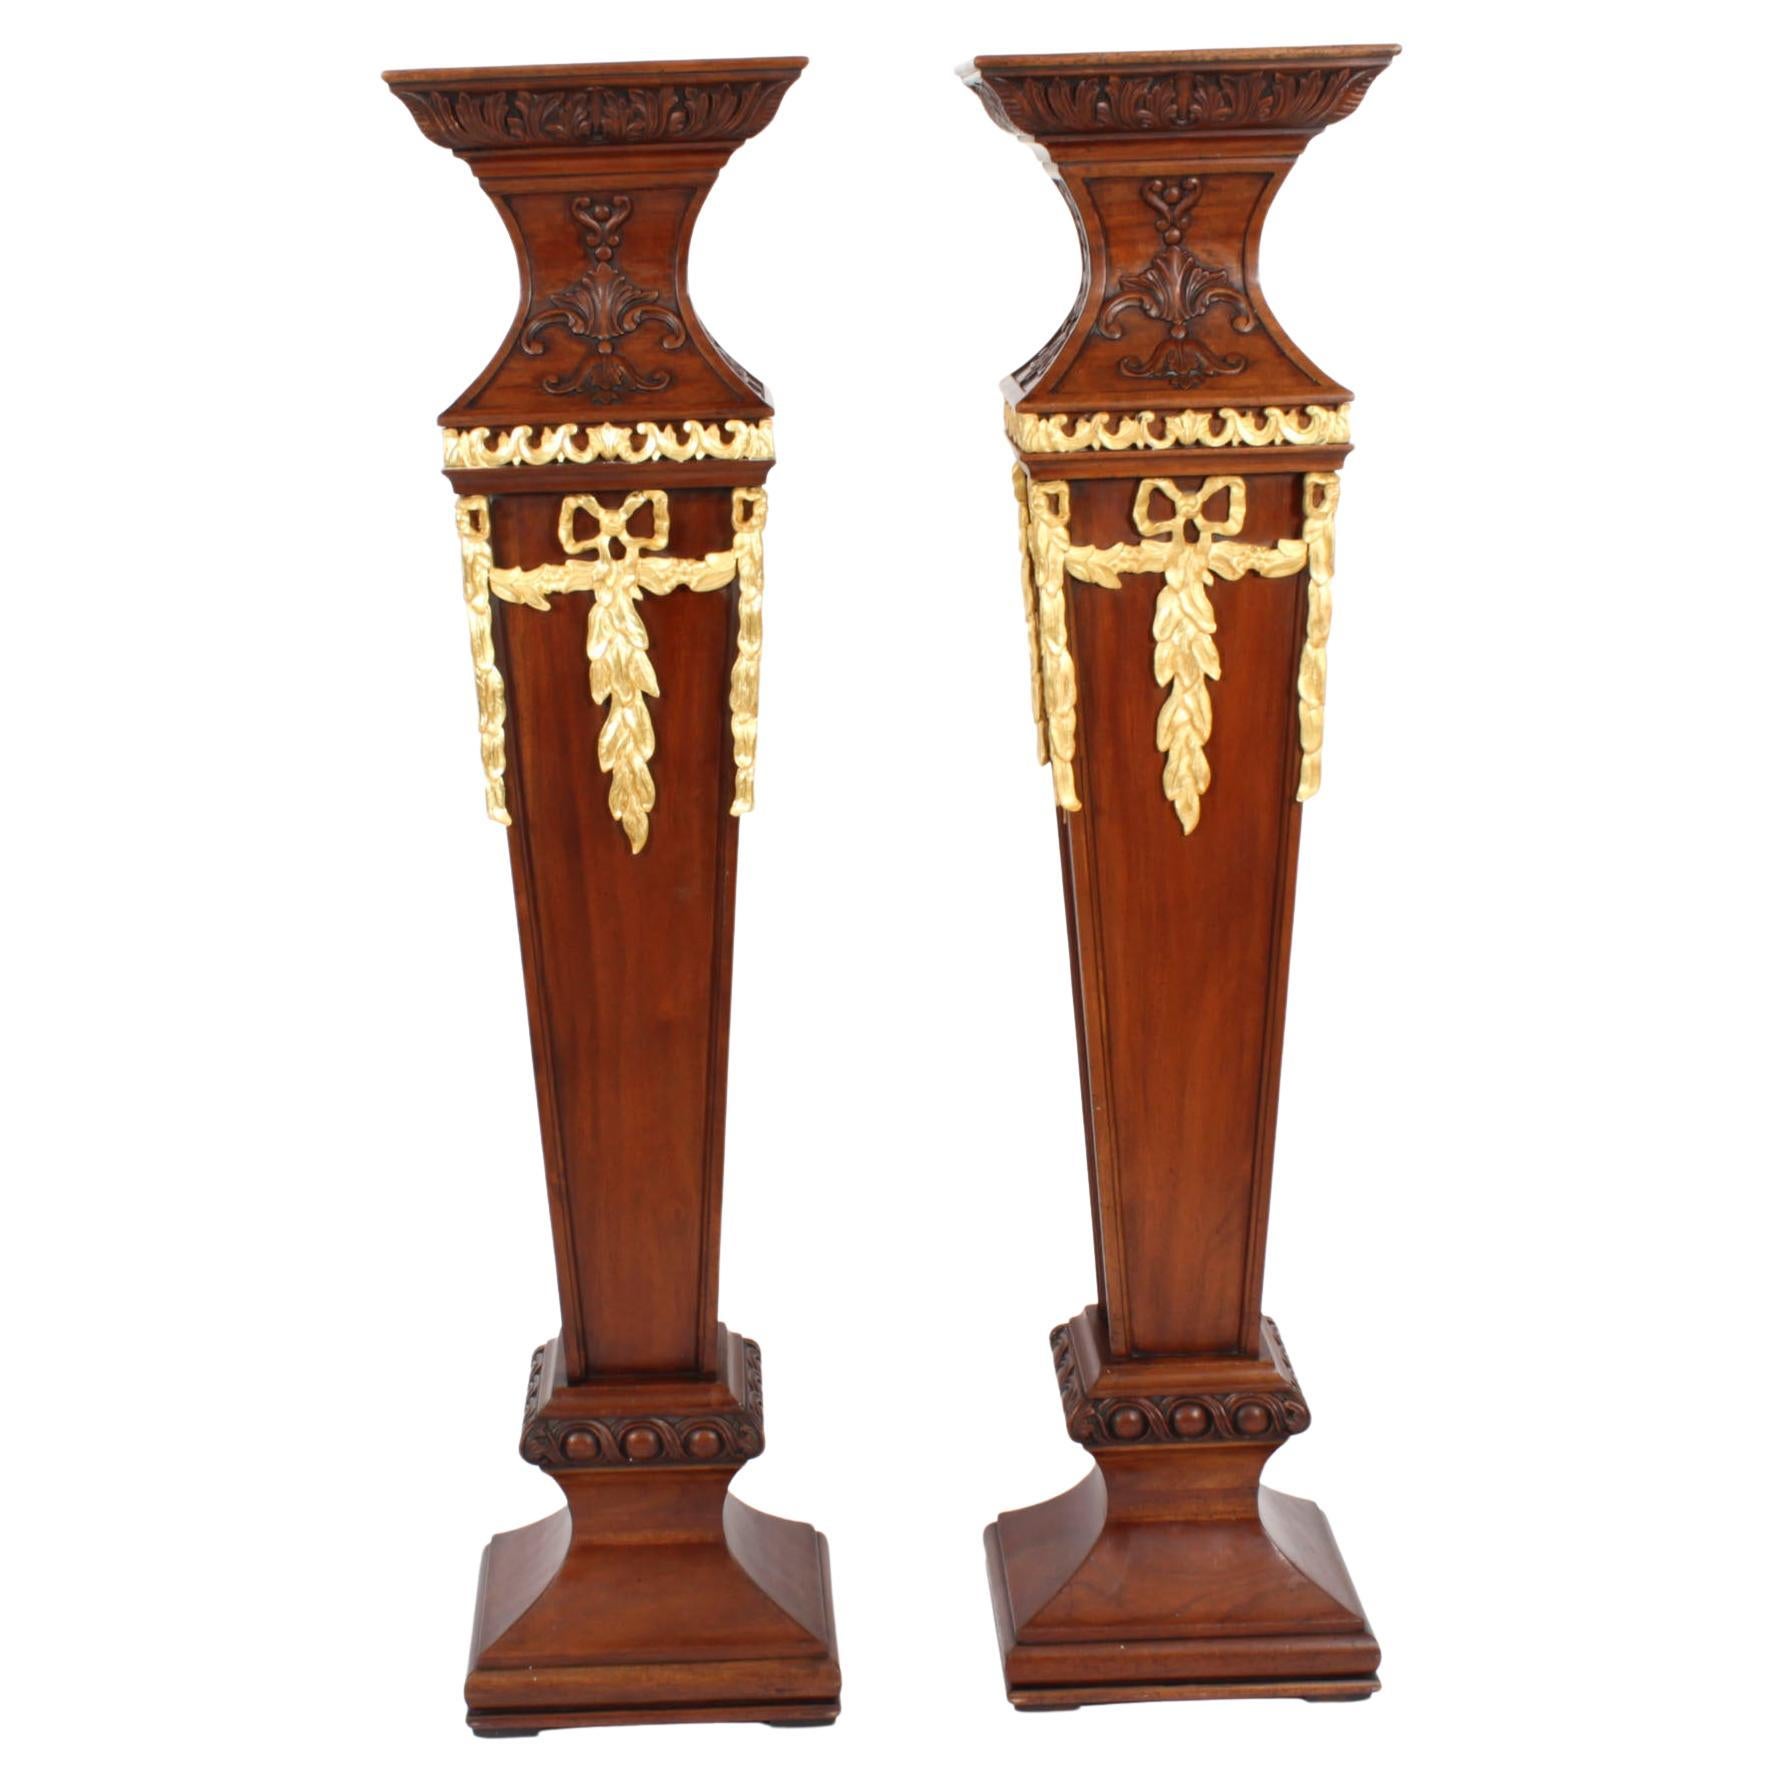 Antique Pair of Edwardian Mahogany Pedestals Torchere Stands Early 20th Century For Sale